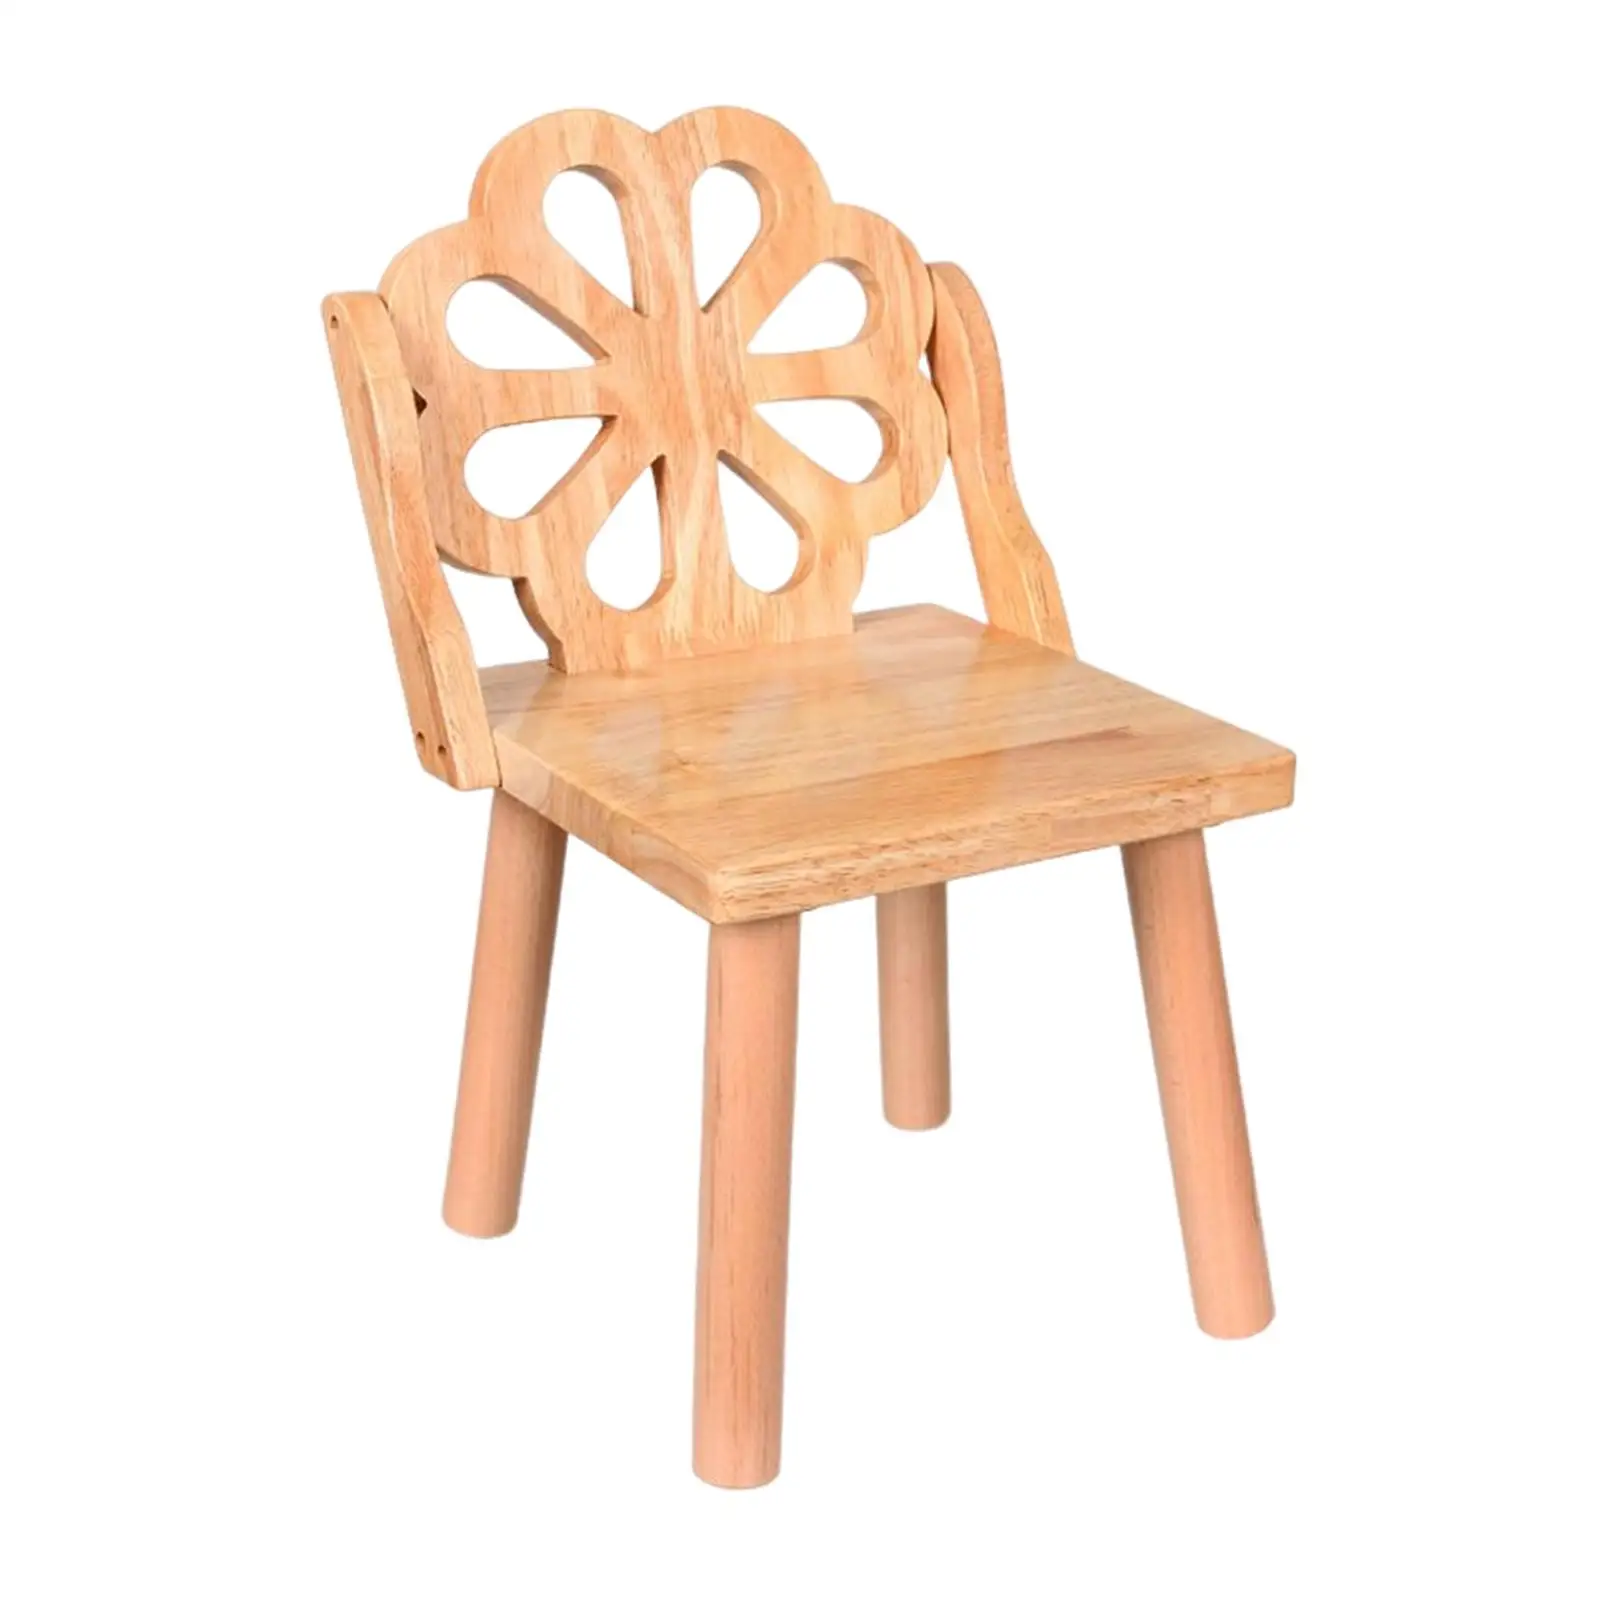 Lightweight Removable Wooden Child Stool Wood High Chair Anti Saving Durable Protable Wood Small Seat Stool for Kids